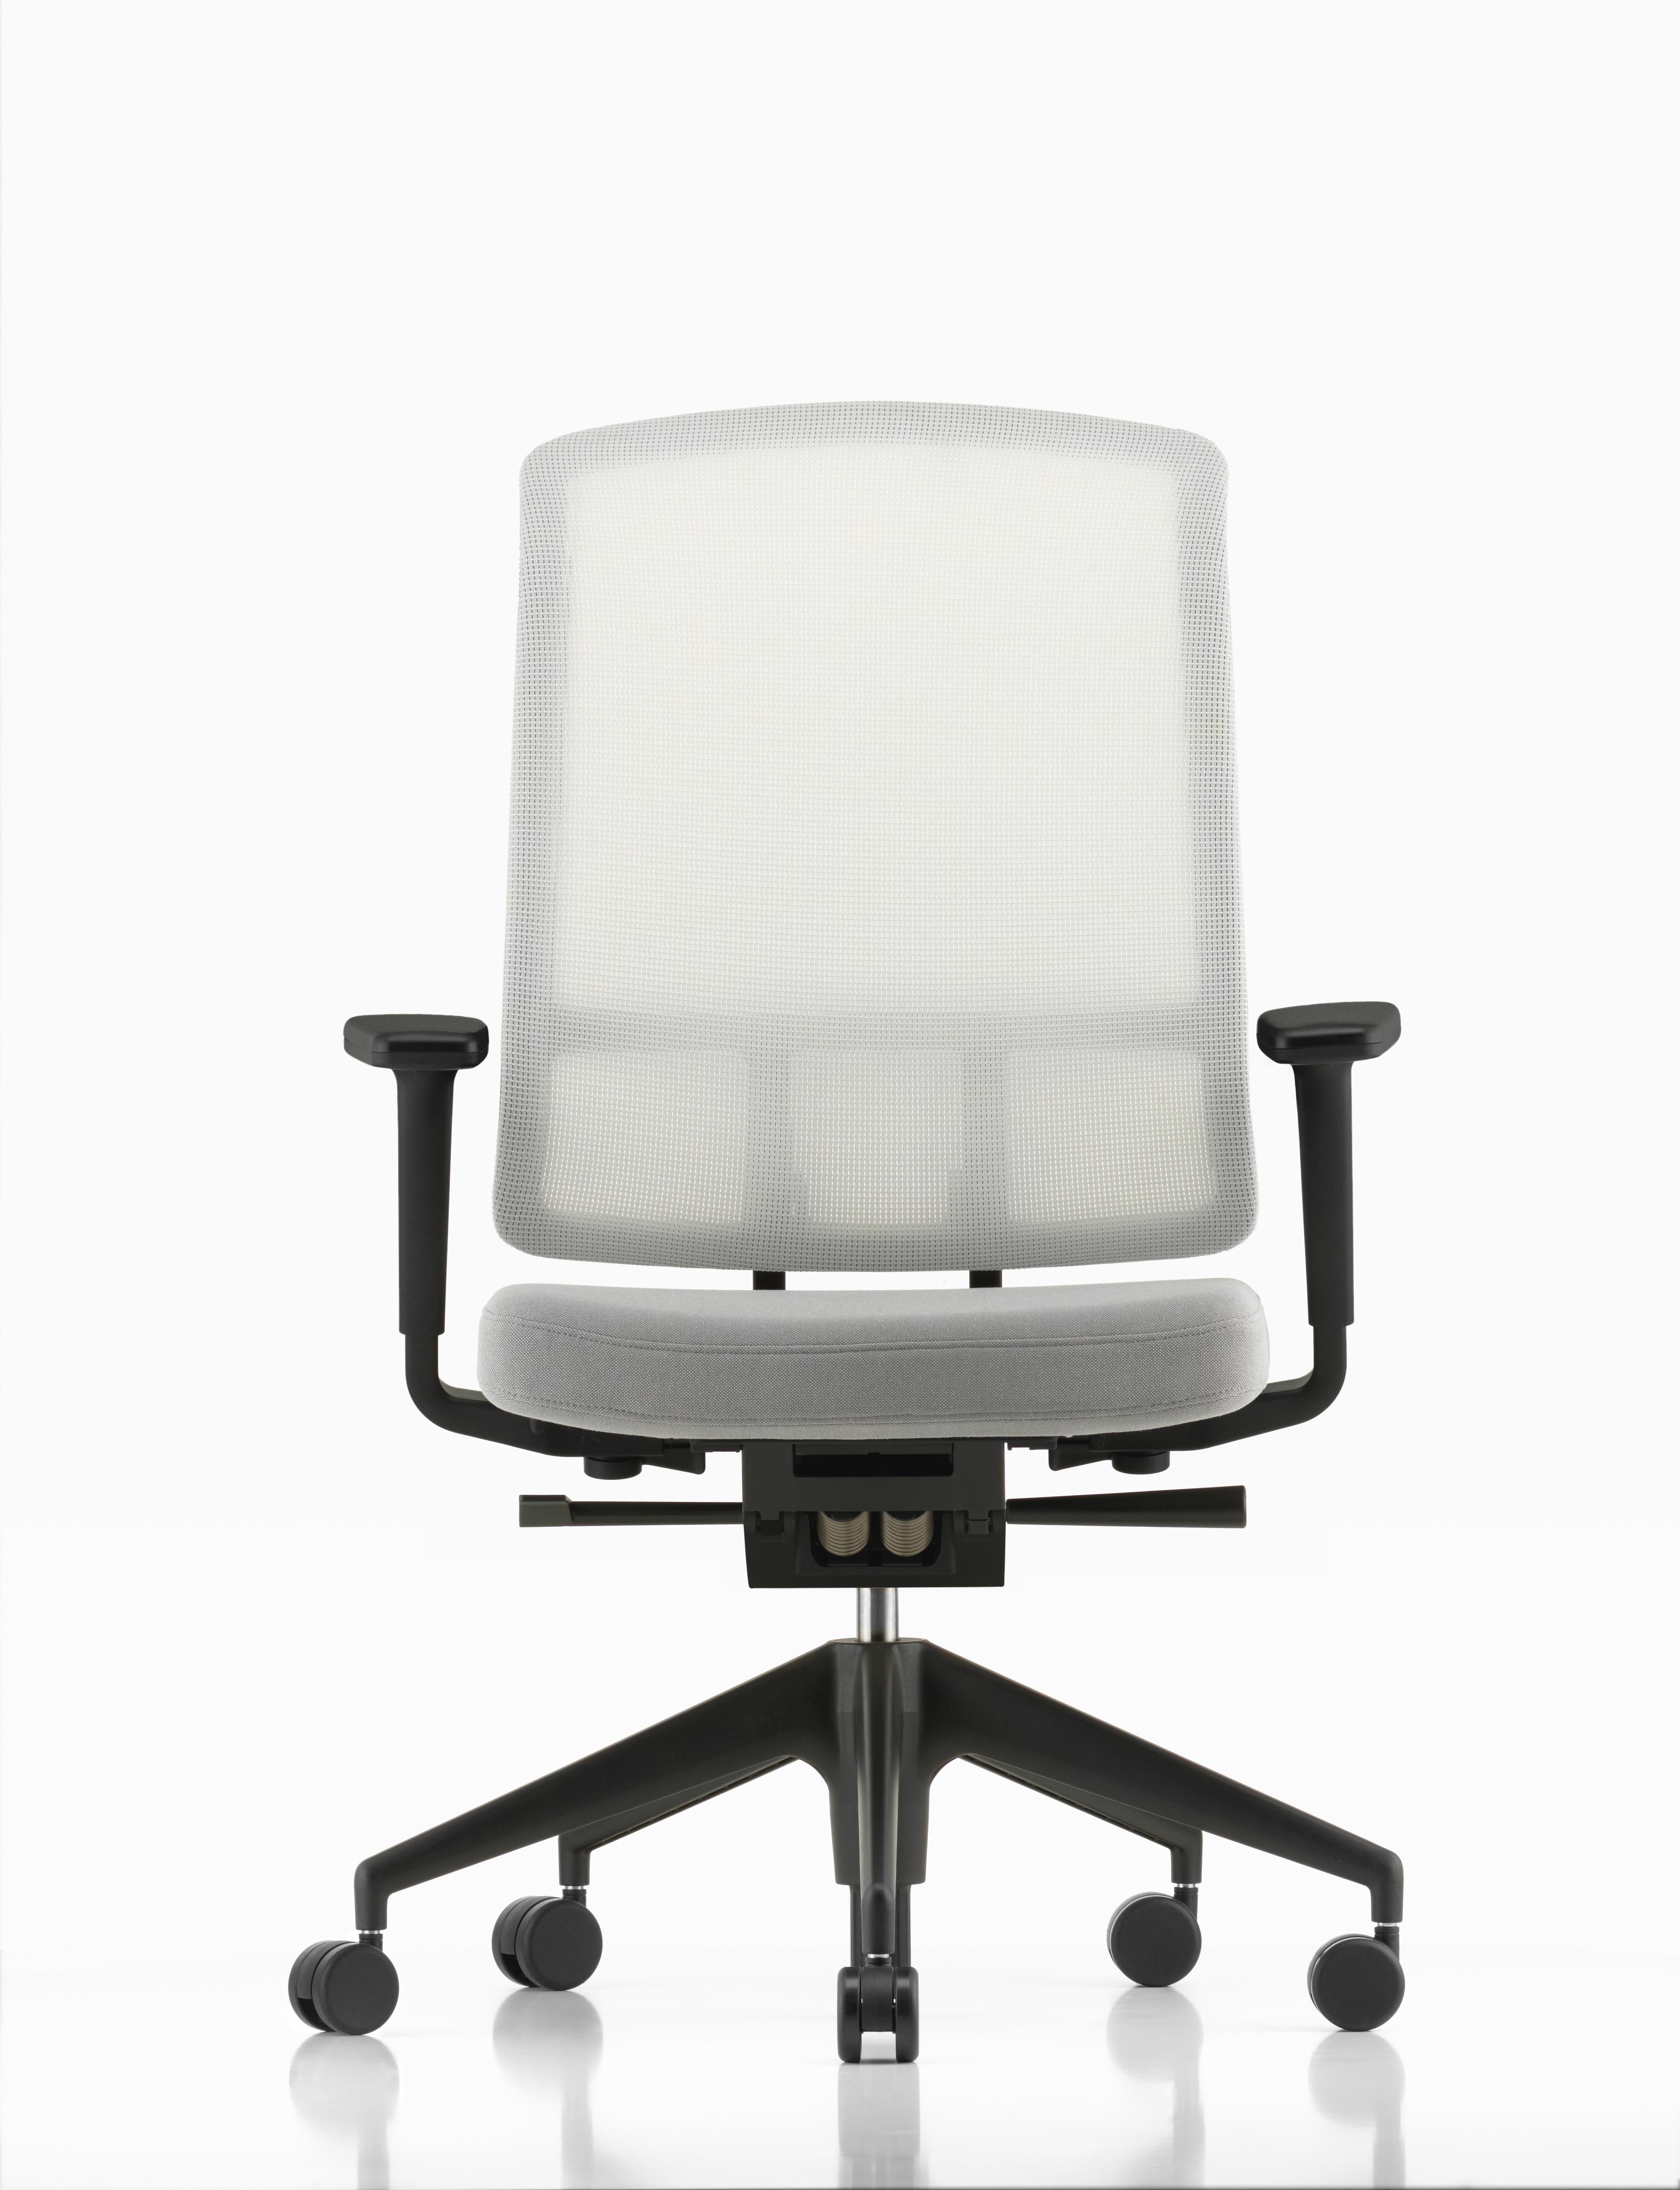 These items are currently only available in the United States.

The AM chair is the combined result of engineering skill, quality design and experience. It unites ergonomic functionality with technical elegance. Dynamic armrests and a